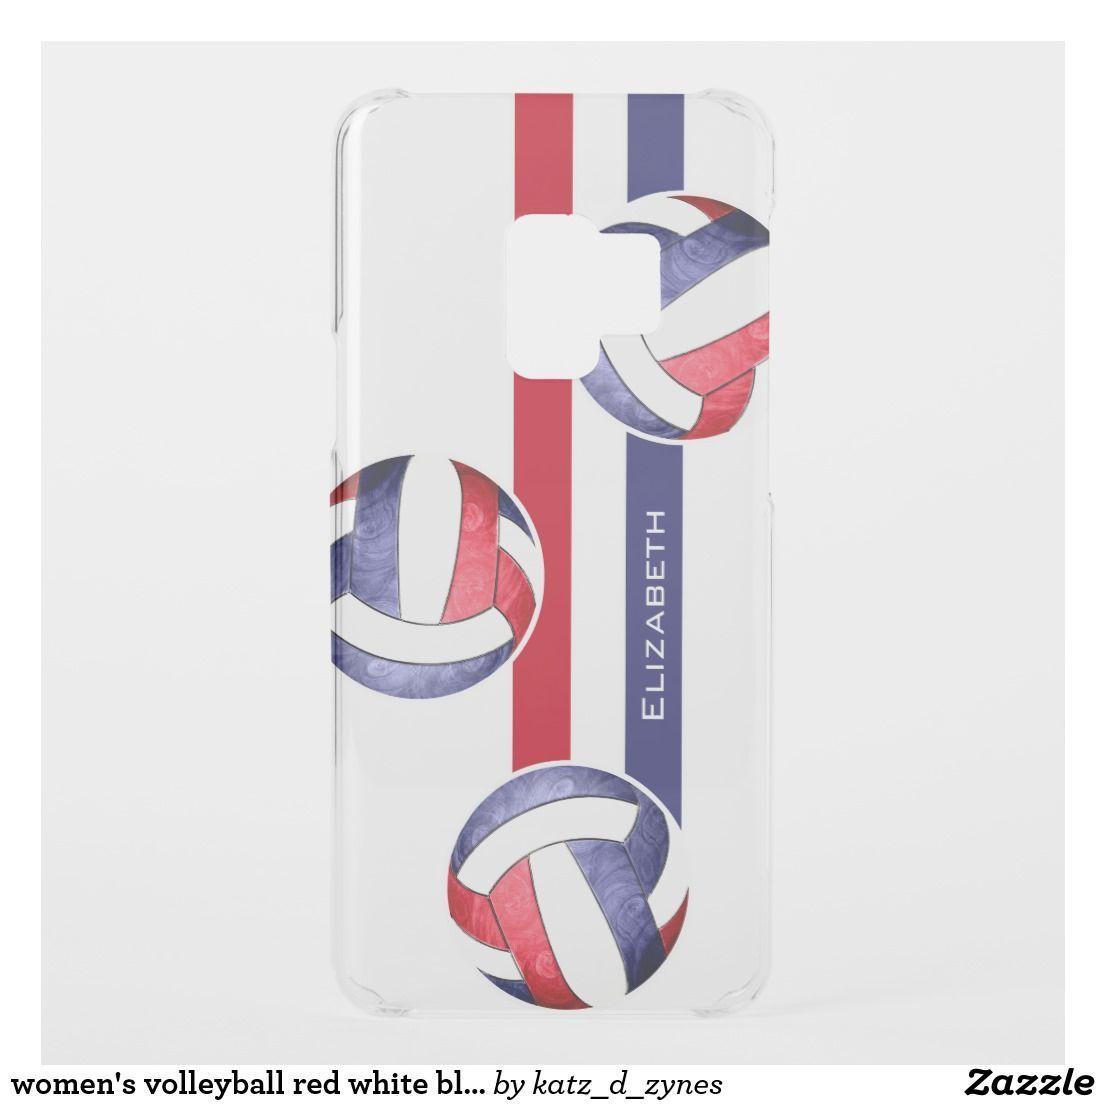 Red White and Blue D. Sports Logo - Women's volleyball red white blue uncommon samsung galaxy s9 case ...